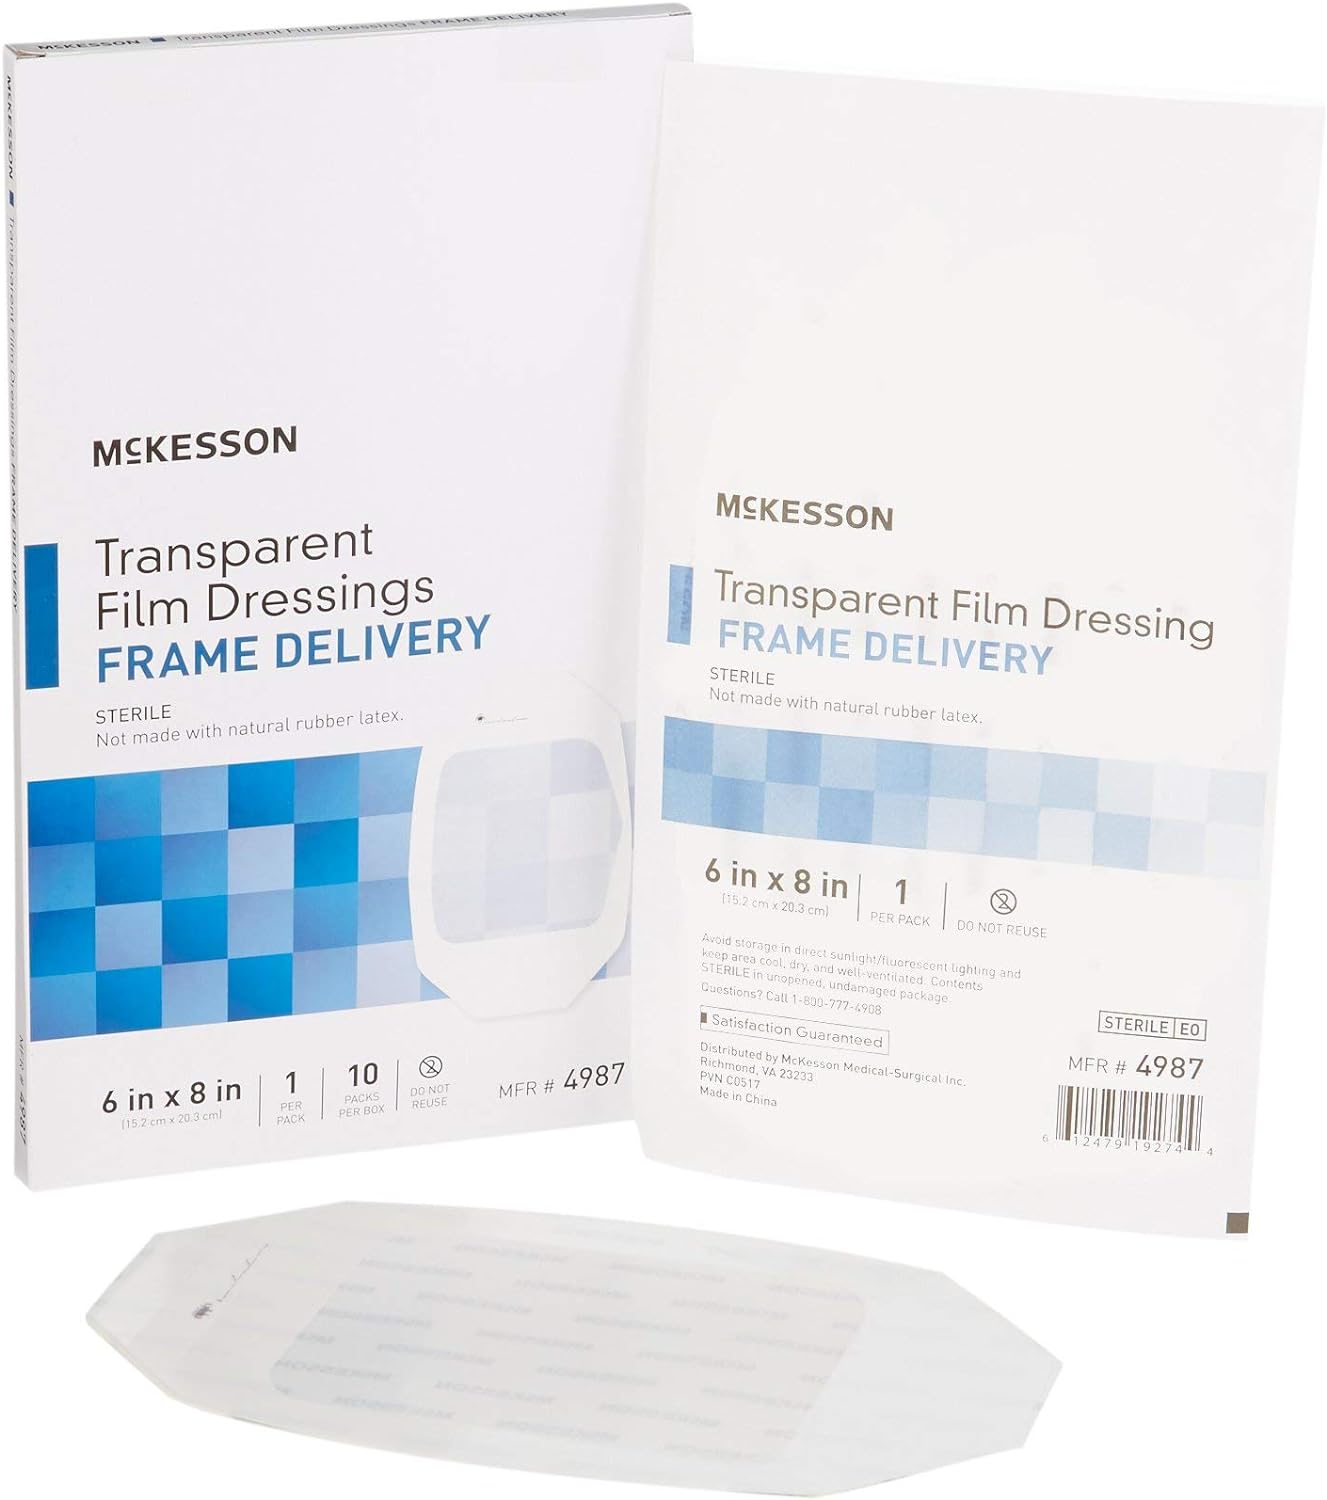 McKesson Transparent Film Dressing, Sterile, Frame Delivery, 6 in x 8 in, 10 Count, 8 Packs, 80 Total